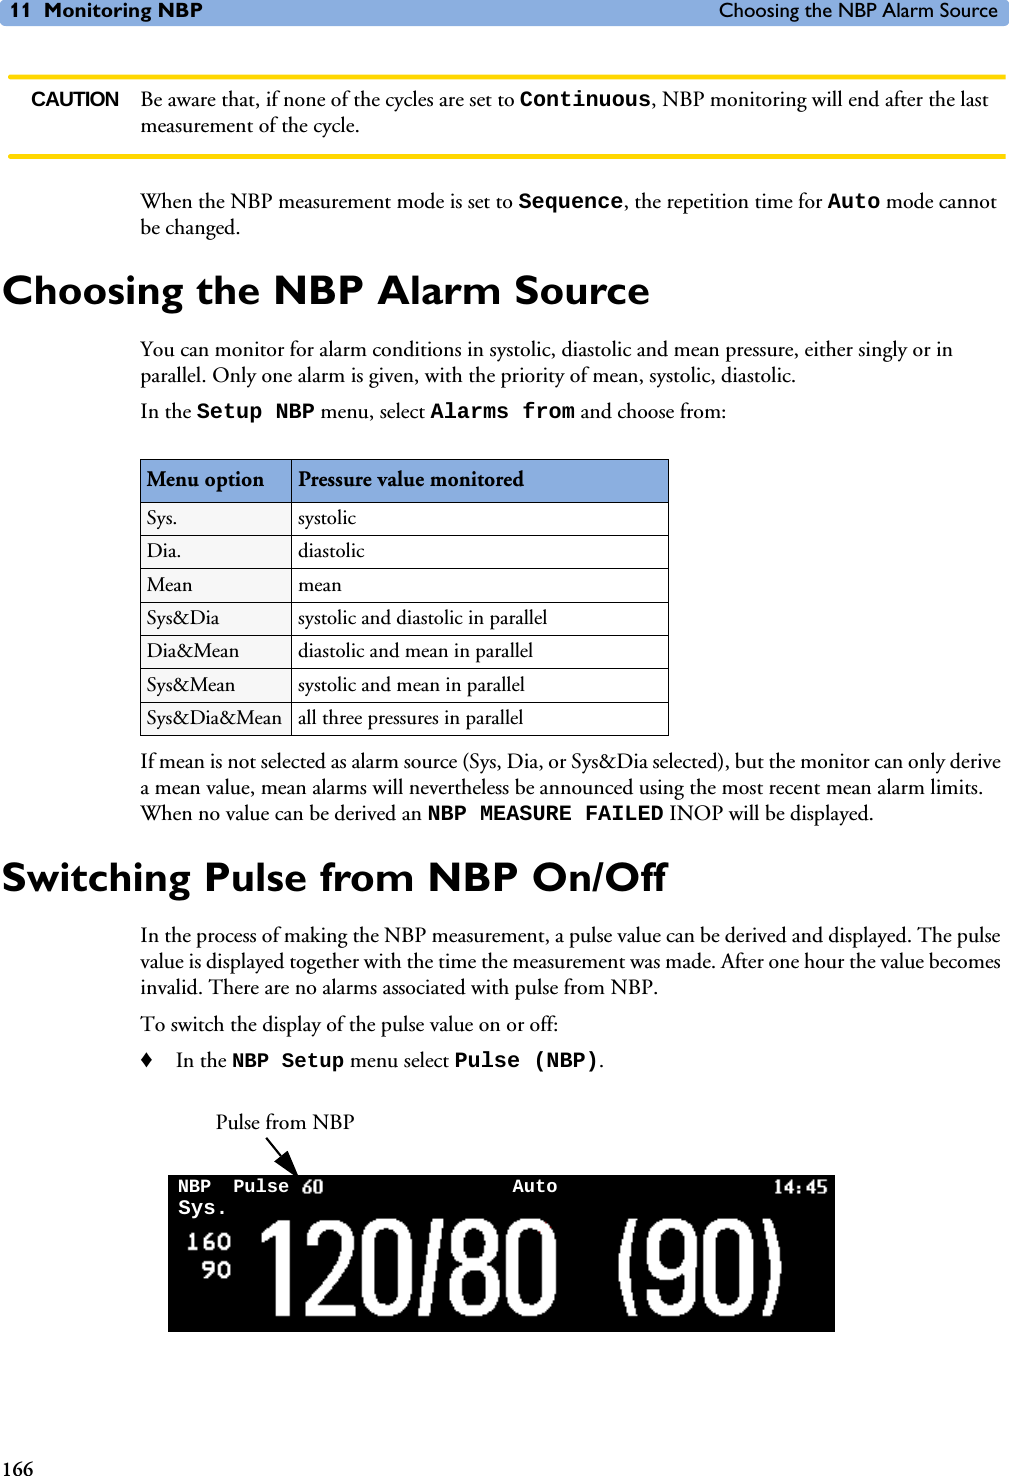 11 Monitoring NBP Choosing the NBP Alarm Source166CAUTION Be aware that, if none of the cycles are set to Continuous, NBP monitoring will end after the last measurement of the cycle.When the NBP measurement mode is set to Sequence, the repetition time for Auto mode cannot be changed. Choosing the NBP Alarm SourceYou can monitor for alarm conditions in systolic, diastolic and mean pressure, either singly or in parallel. Only one alarm is given, with the priority of mean, systolic, diastolic. In the Setup NBP menu, select Alarms from and choose from:If mean is not selected as alarm source (Sys, Dia, or Sys&amp;Dia selected), but the monitor can only derive a mean value, mean alarms will nevertheless be announced using the most recent mean alarm limits. When no value can be derived an NBP MEASURE FAILED INOP will be displayed.Switching Pulse from NBP On/OffIn the process of making the NBP measurement, a pulse value can be derived and displayed. The pulse value is displayed together with the time the measurement was made. After one hour the value becomes invalid. There are no alarms associated with pulse from NBP. To switch the display of the pulse value on or off:♦In the NBP Setup menu select Pulse (NBP).Menu option Pressure value monitoredSys. systolic Dia. diastolic Mean mean Sys&amp;Dia systolic and diastolic in parallelDia&amp;Mean diastolic and mean in parallelSys&amp;Mean systolic and mean in parallelSys&amp;Dia&amp;Mean all three pressures in parallelPulse from NBPNBP AutoSys. Pulse